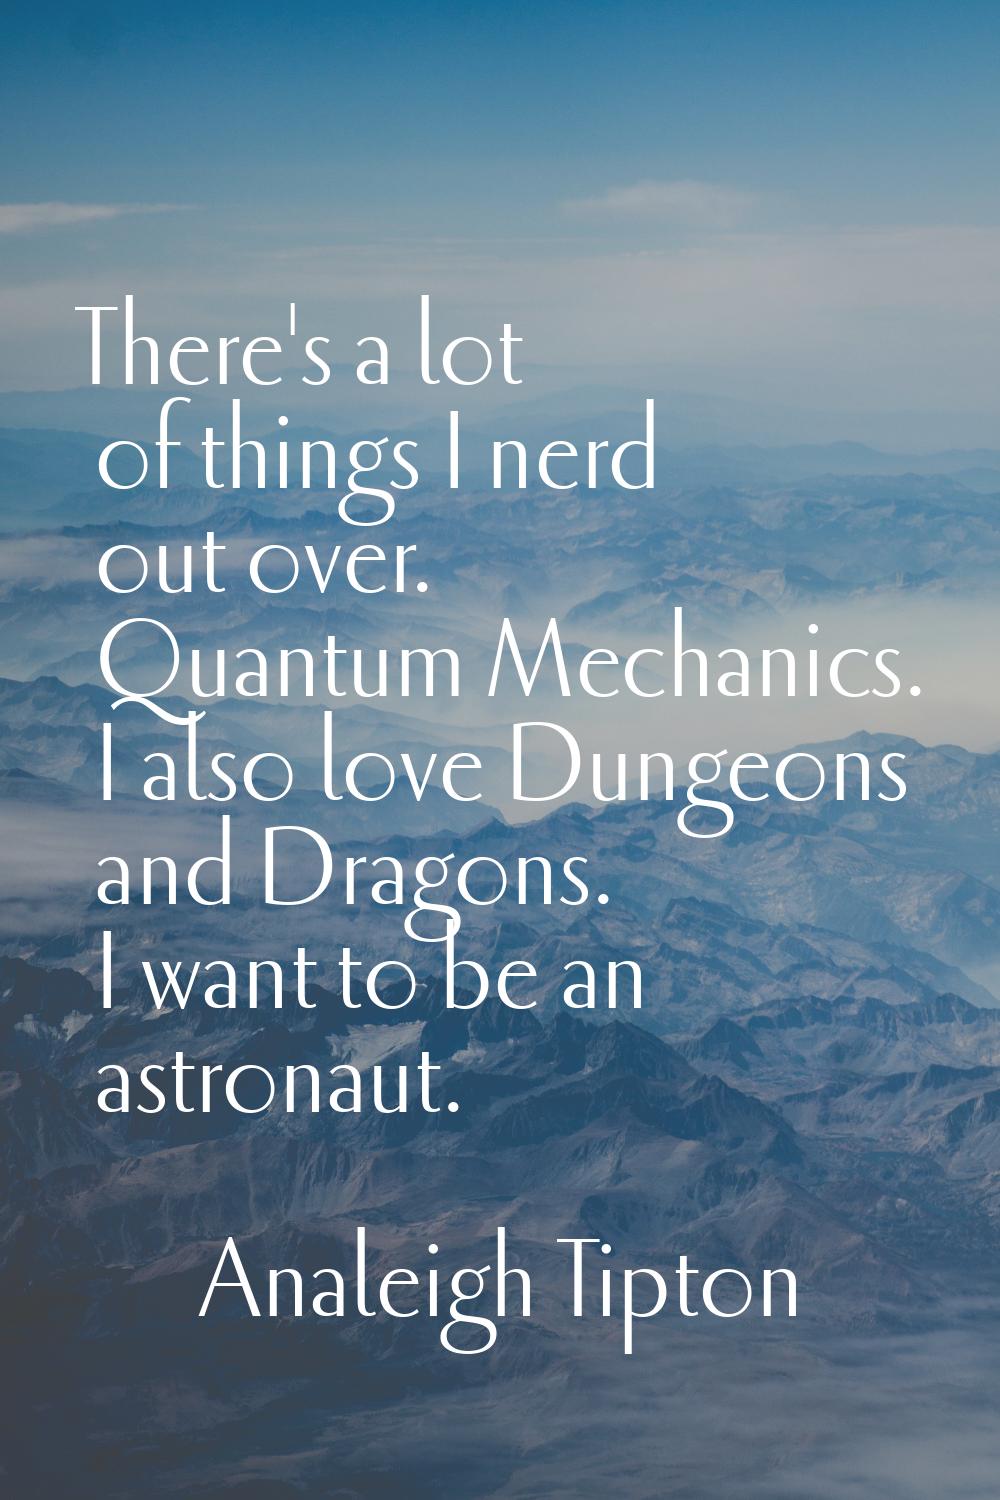 There's a lot of things I nerd out over. Quantum Mechanics. I also love Dungeons and Dragons. I wan